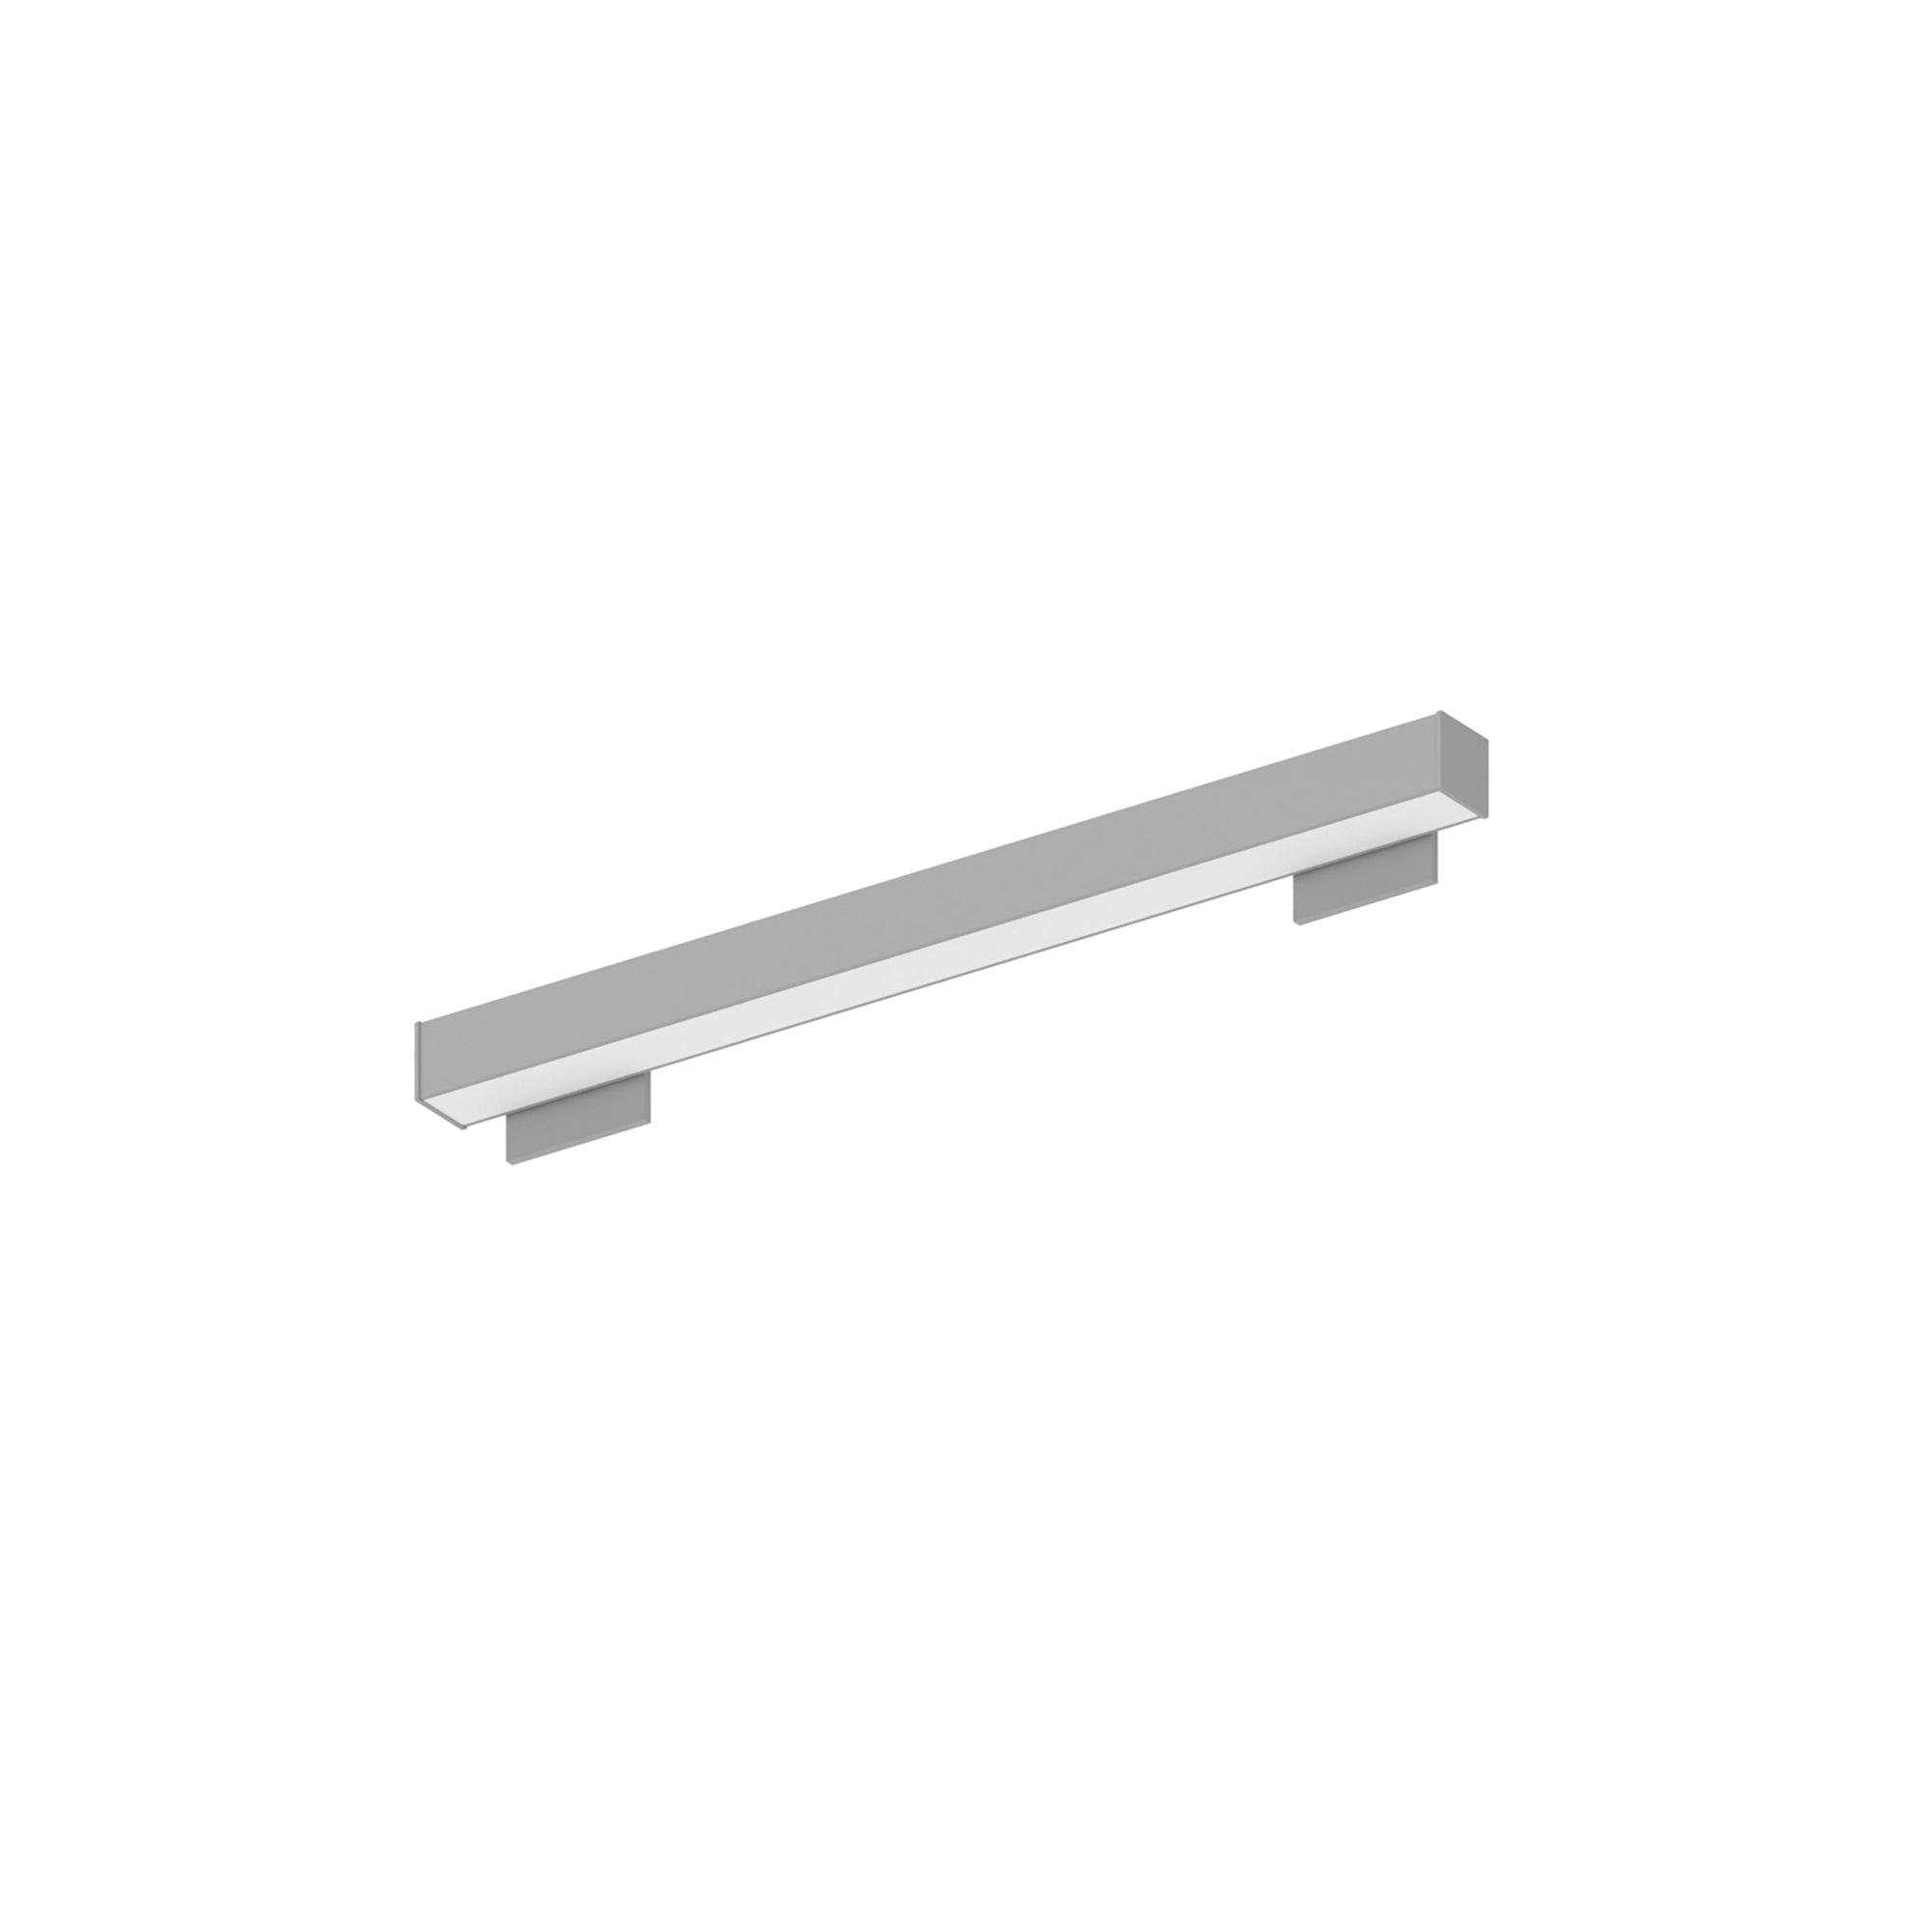 Nora Lighting NWLIN-21040A/L4-R4 - Linear - 2' L-Line LED Wall Mount Linear, 2100lm / 4000K, 4 Inchx4 Inch Left Plate & 4 Inchx4 Inch Right Plate, Aluminum Finish